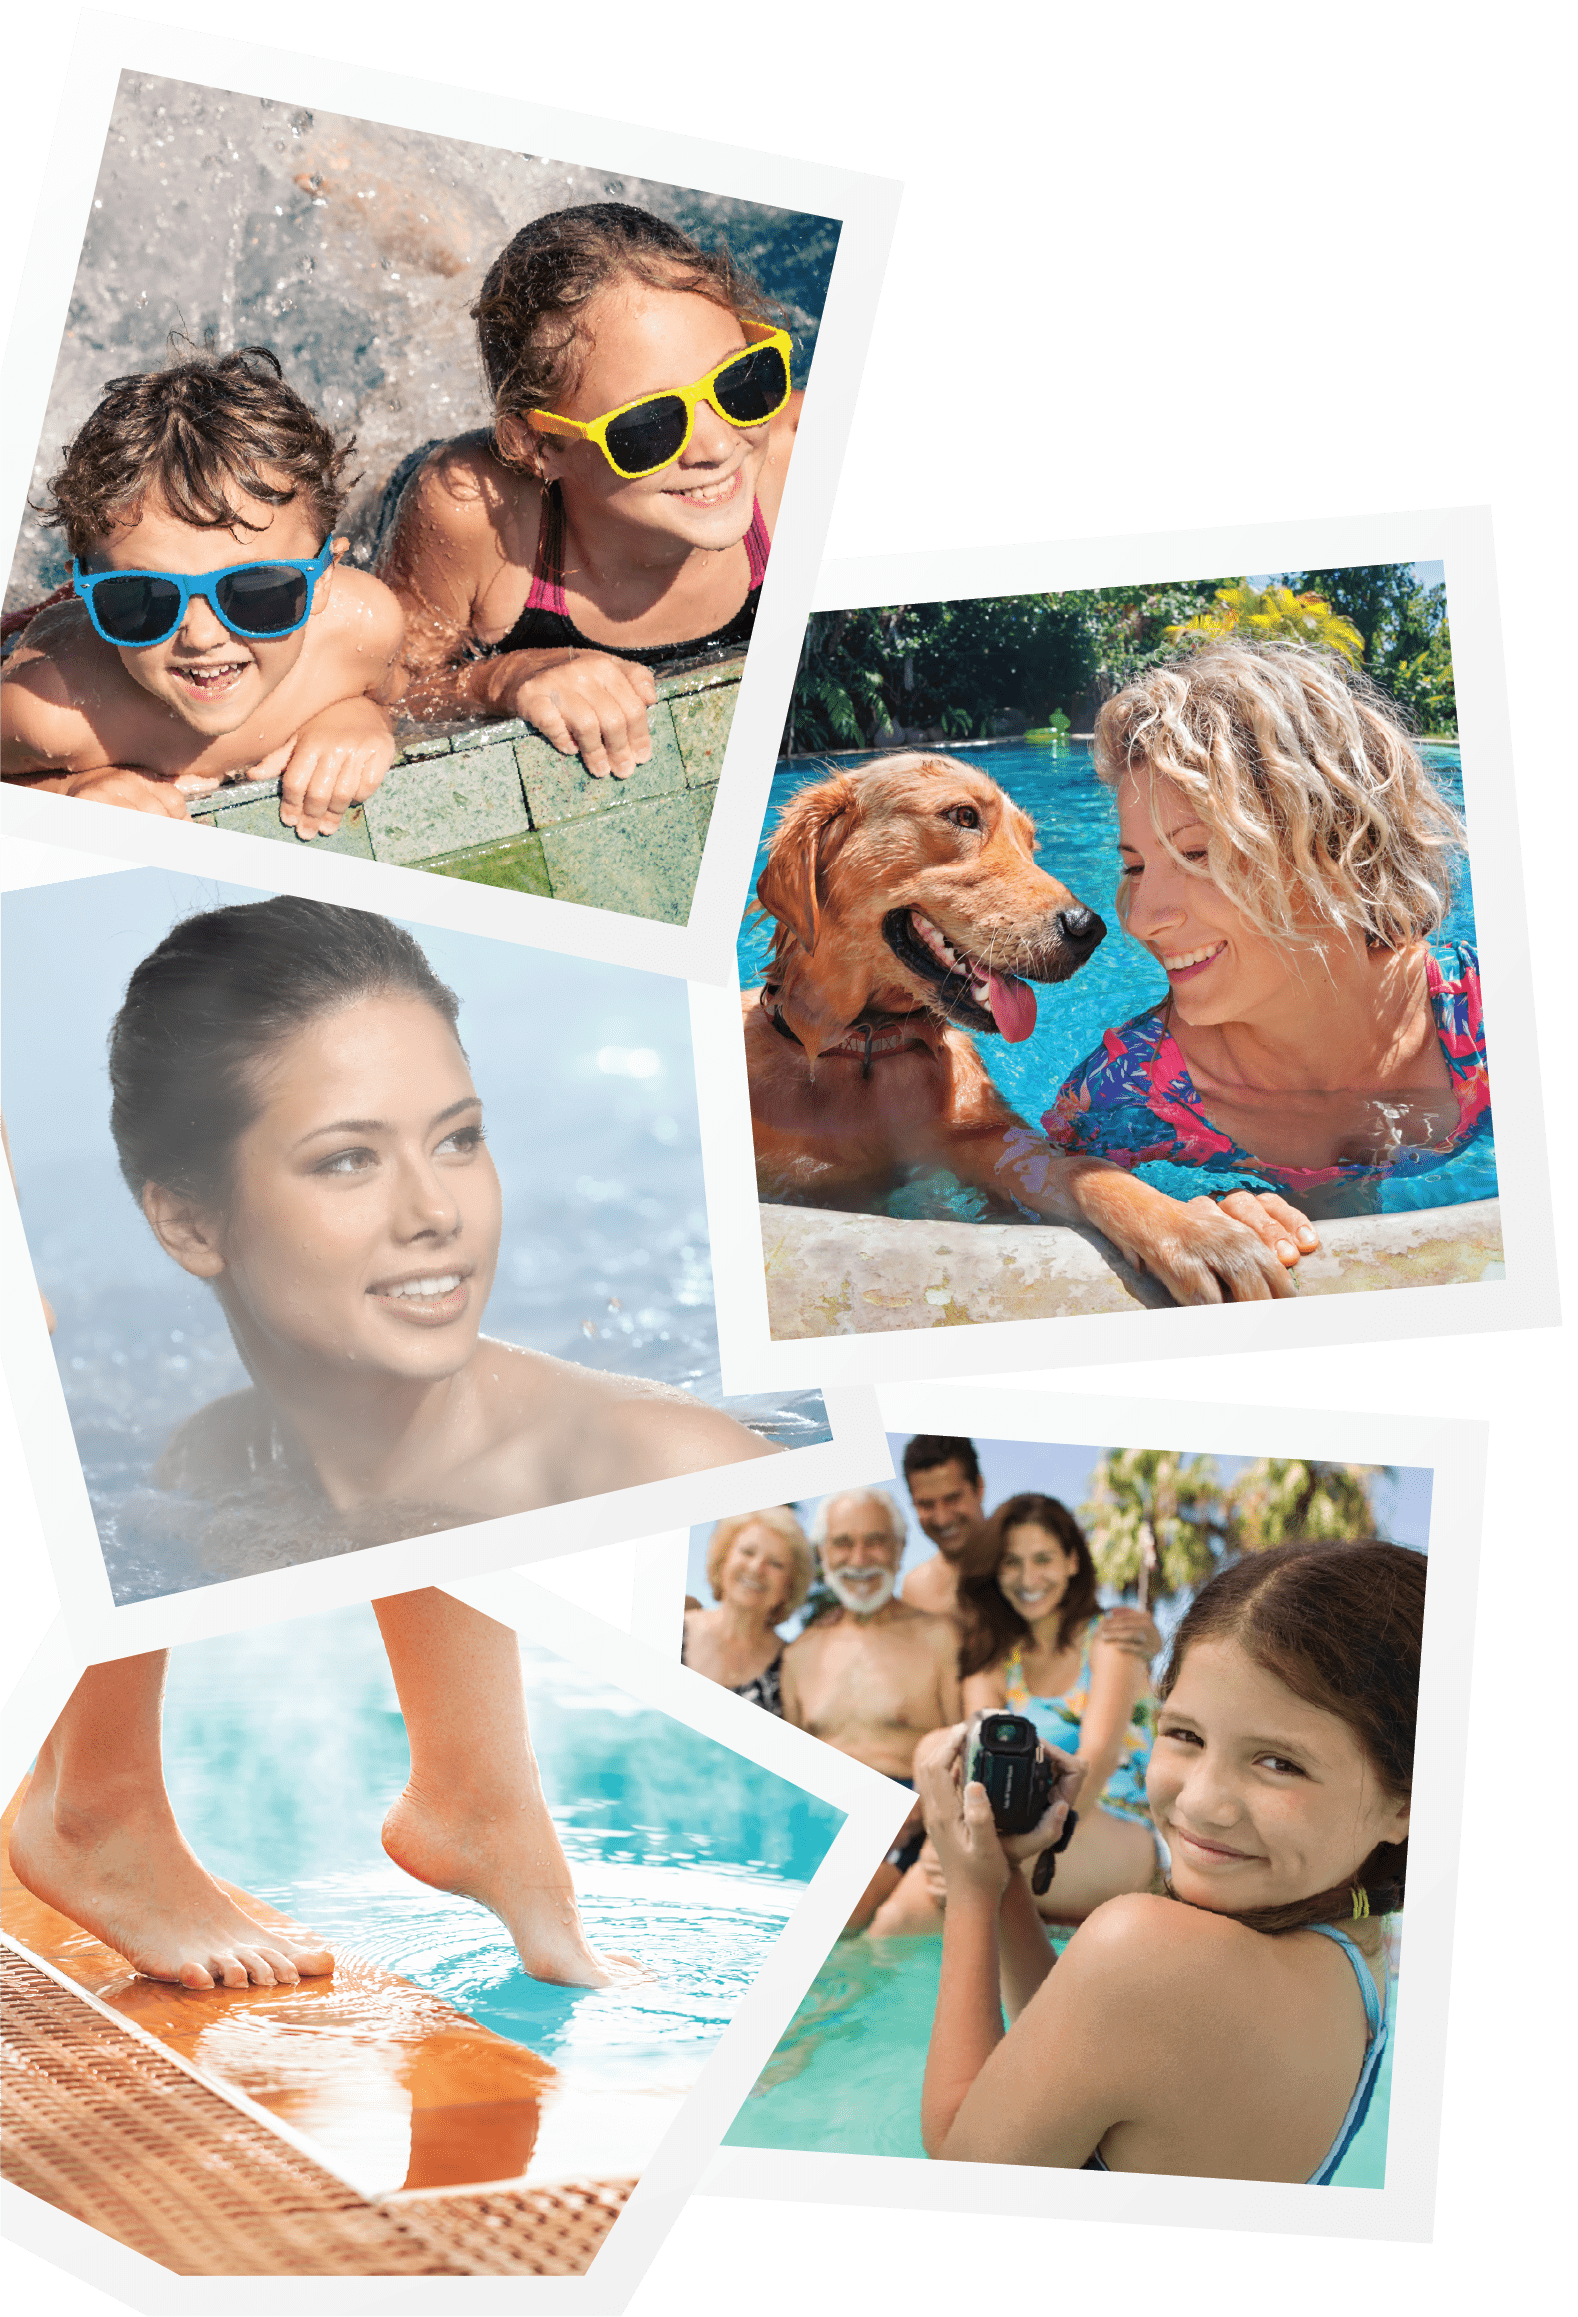 cards of stock images of people in pools